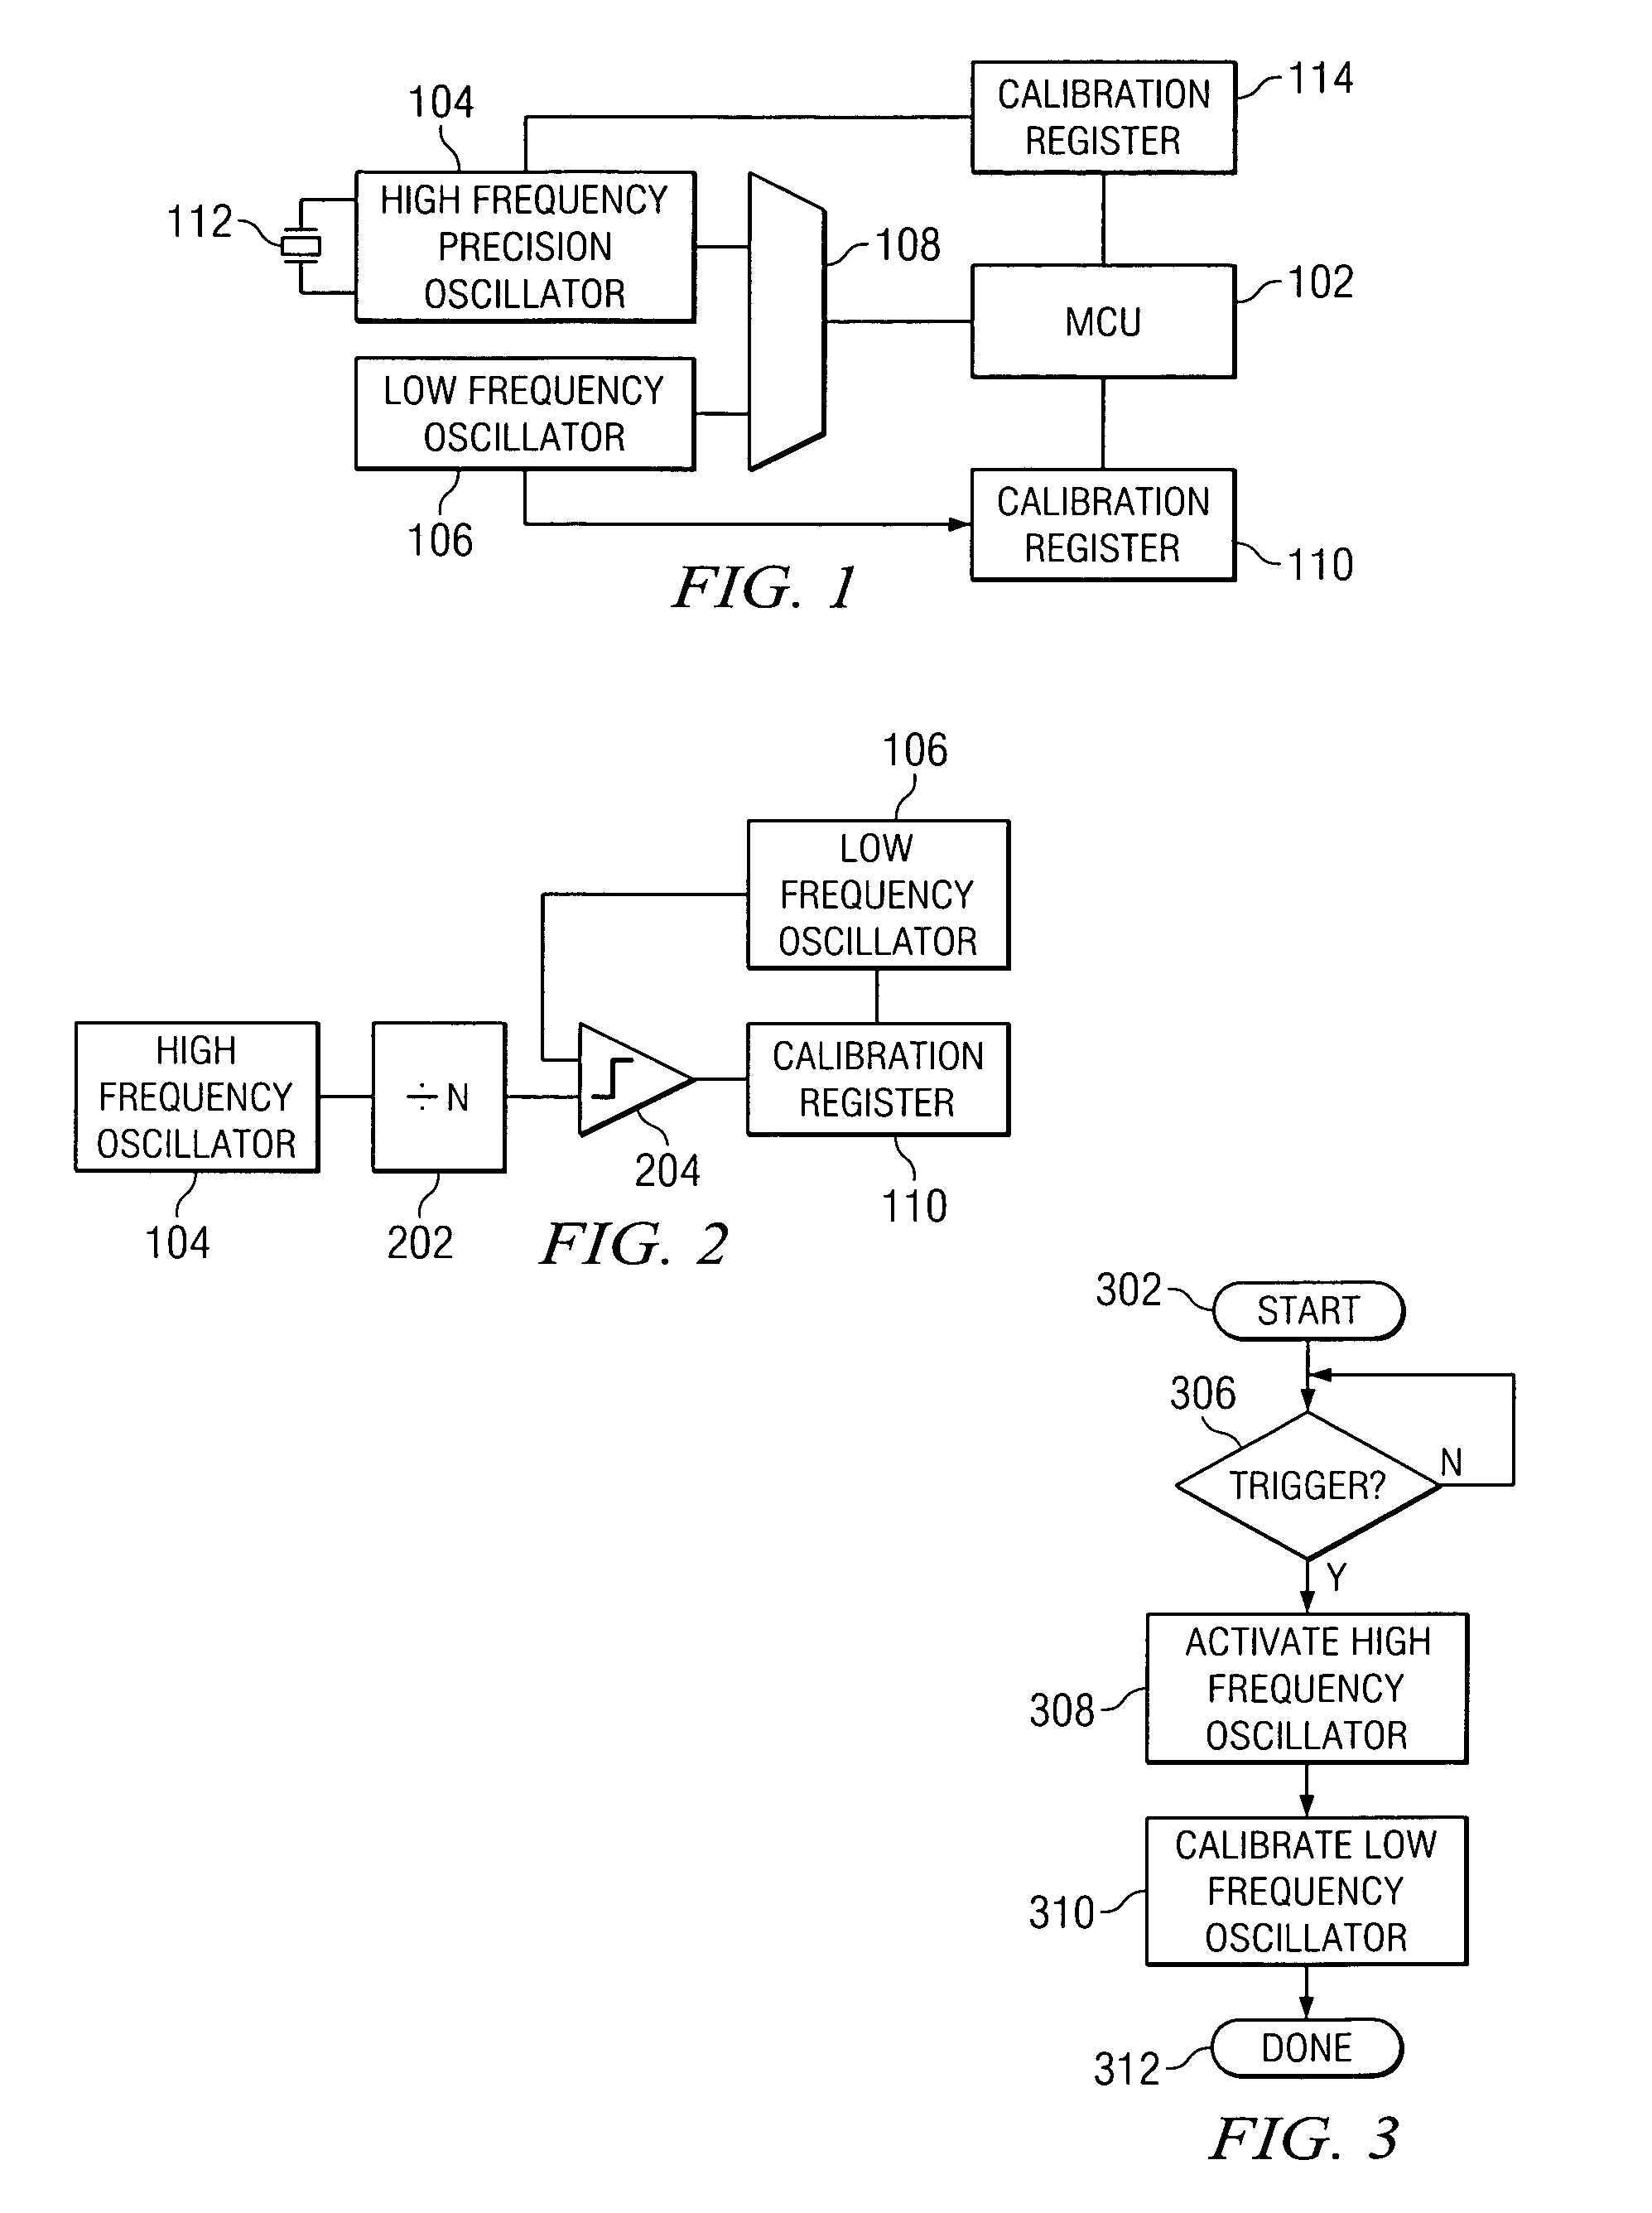 Method and apparatus for calibration of a low frequency oscillator in a processor based system